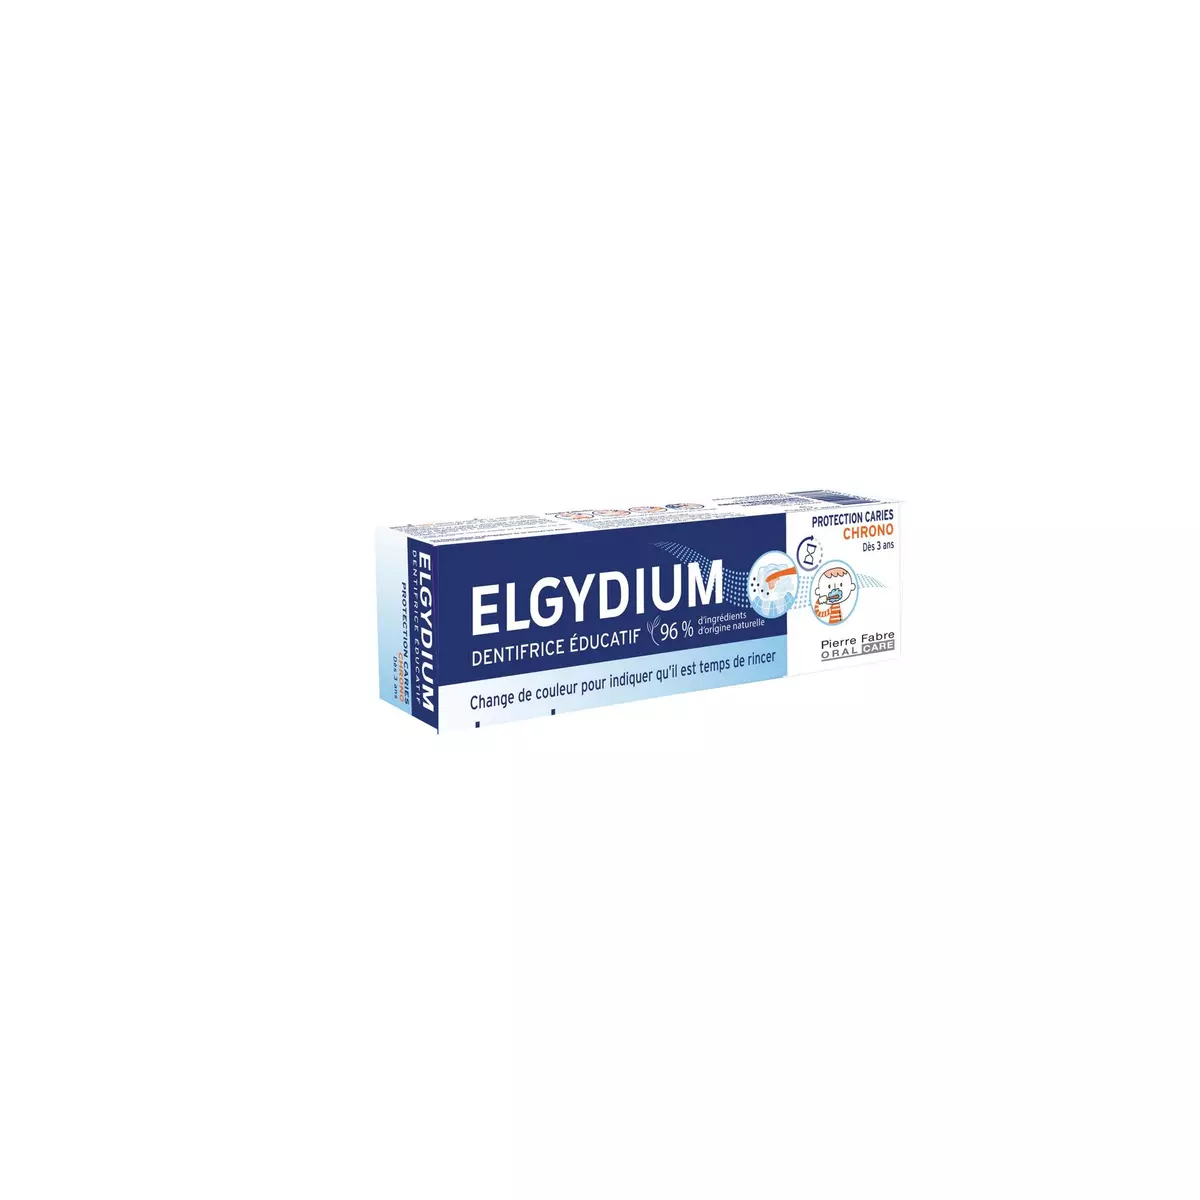 ELGYDIUM Dentifrice protection caries dès 3 ans 50ml